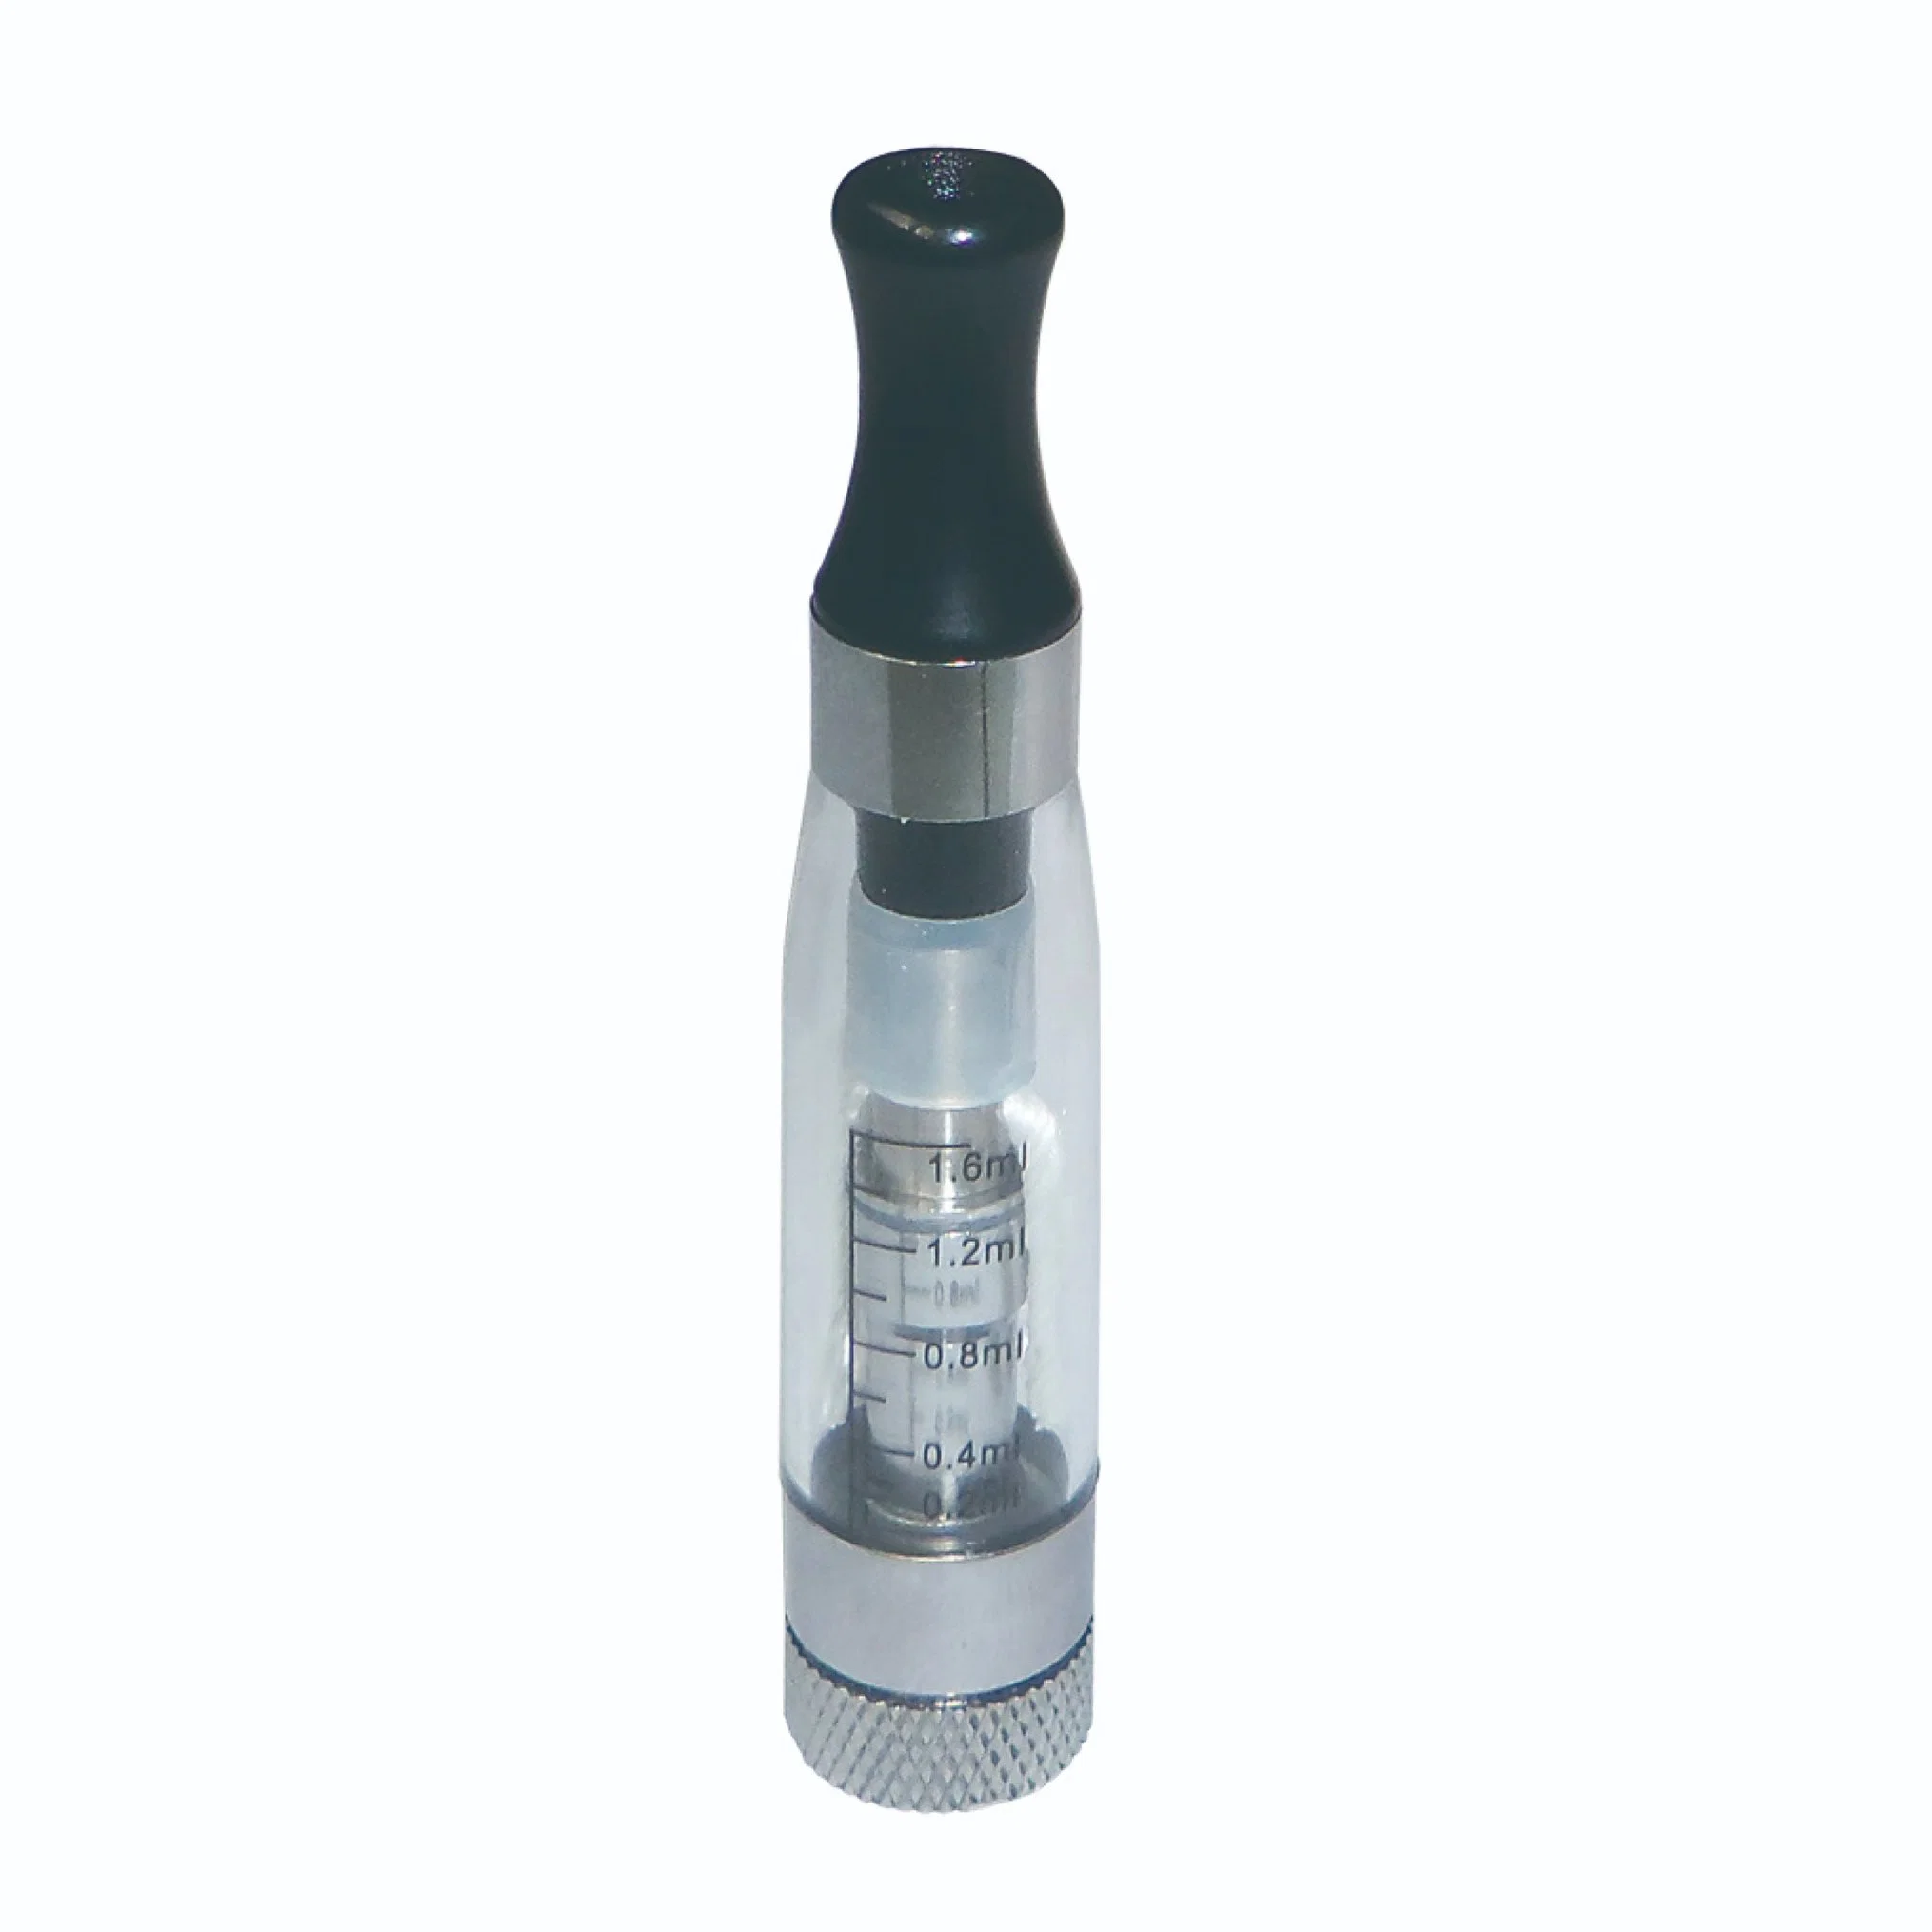 Top Selling EGO CE4 CE5 Plus and with Cap Clearomizer Vape Pen